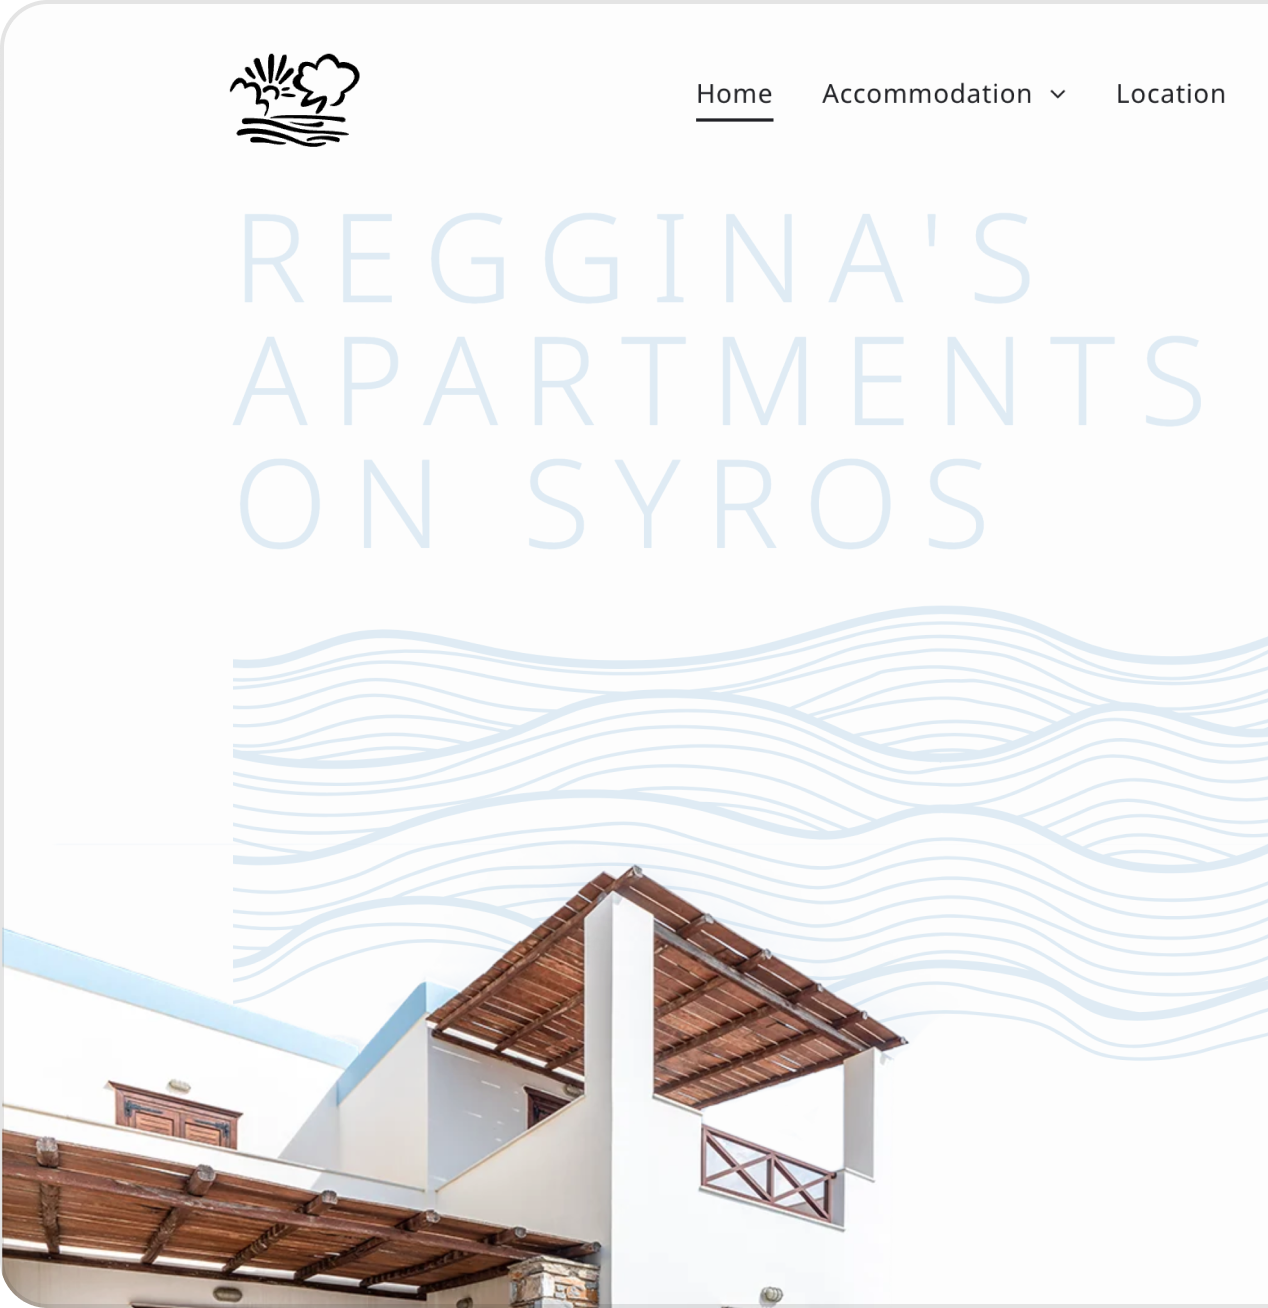 A website for regina 's apartments on syros